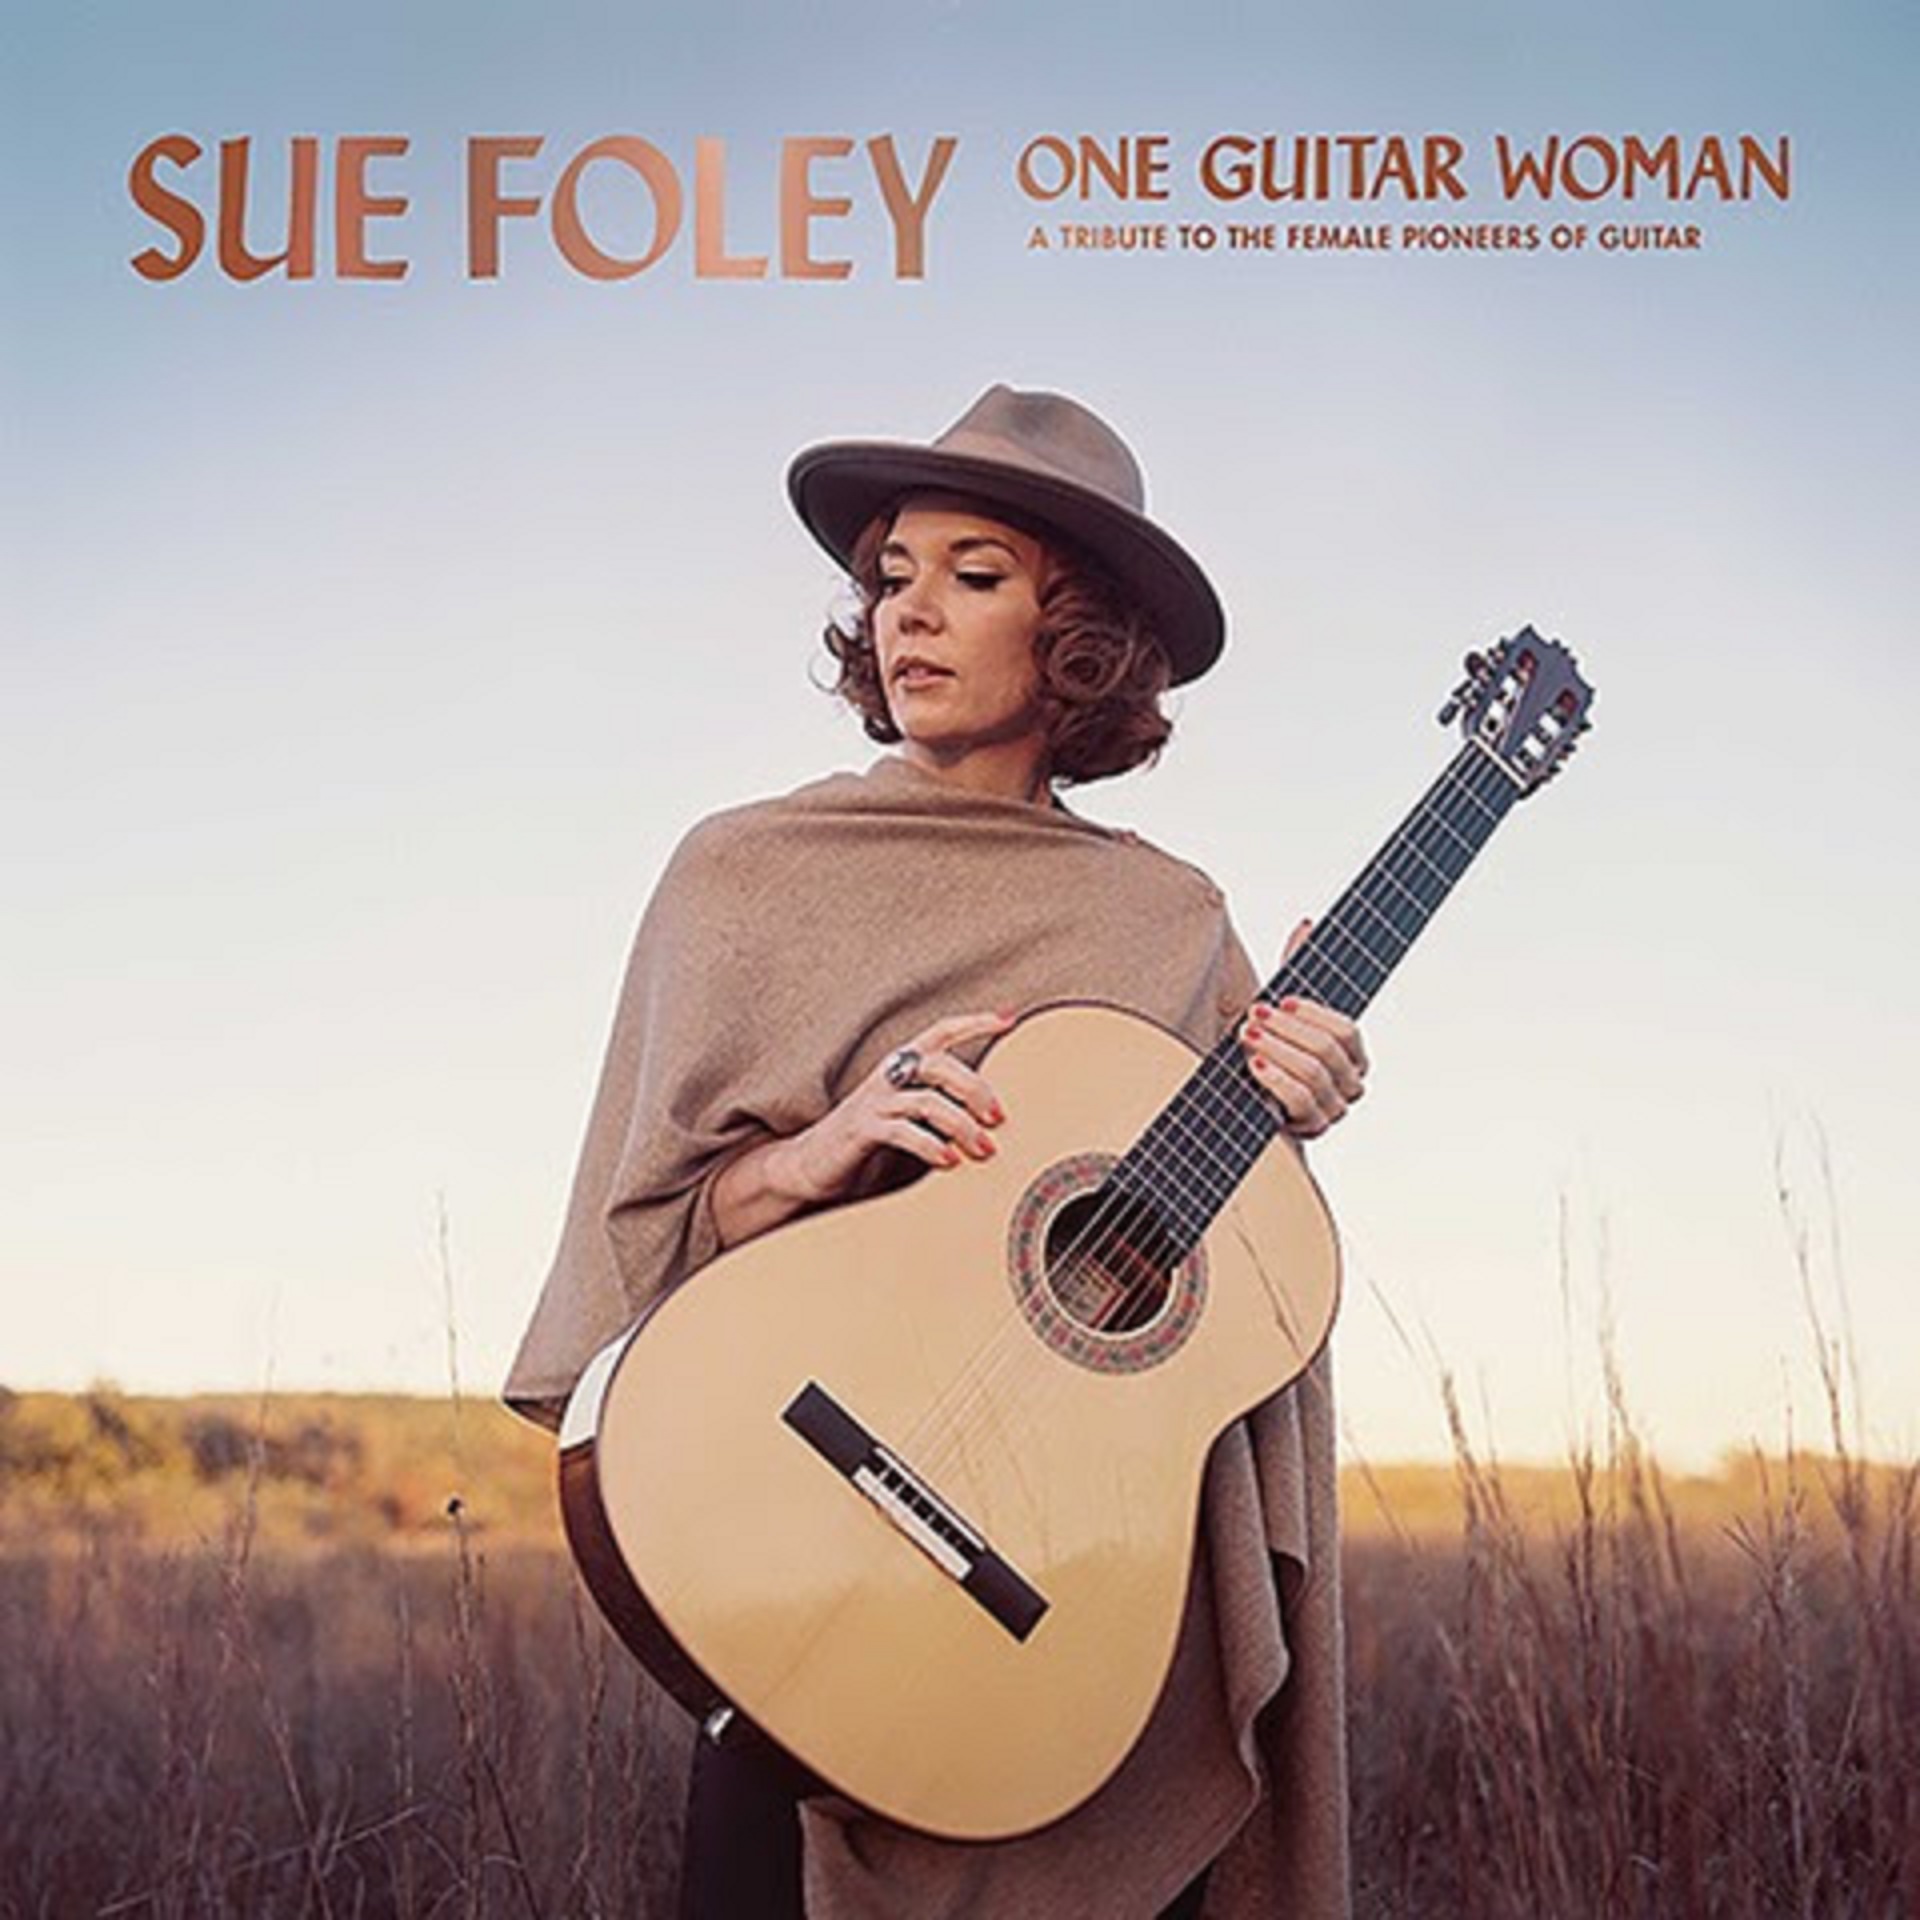 SUE FOLEY RELEASES "MAYBELLE'S GUITAR" – SECOND SINGLE FROM UPCOMING ONE GUITAR WOMAN ALBUM